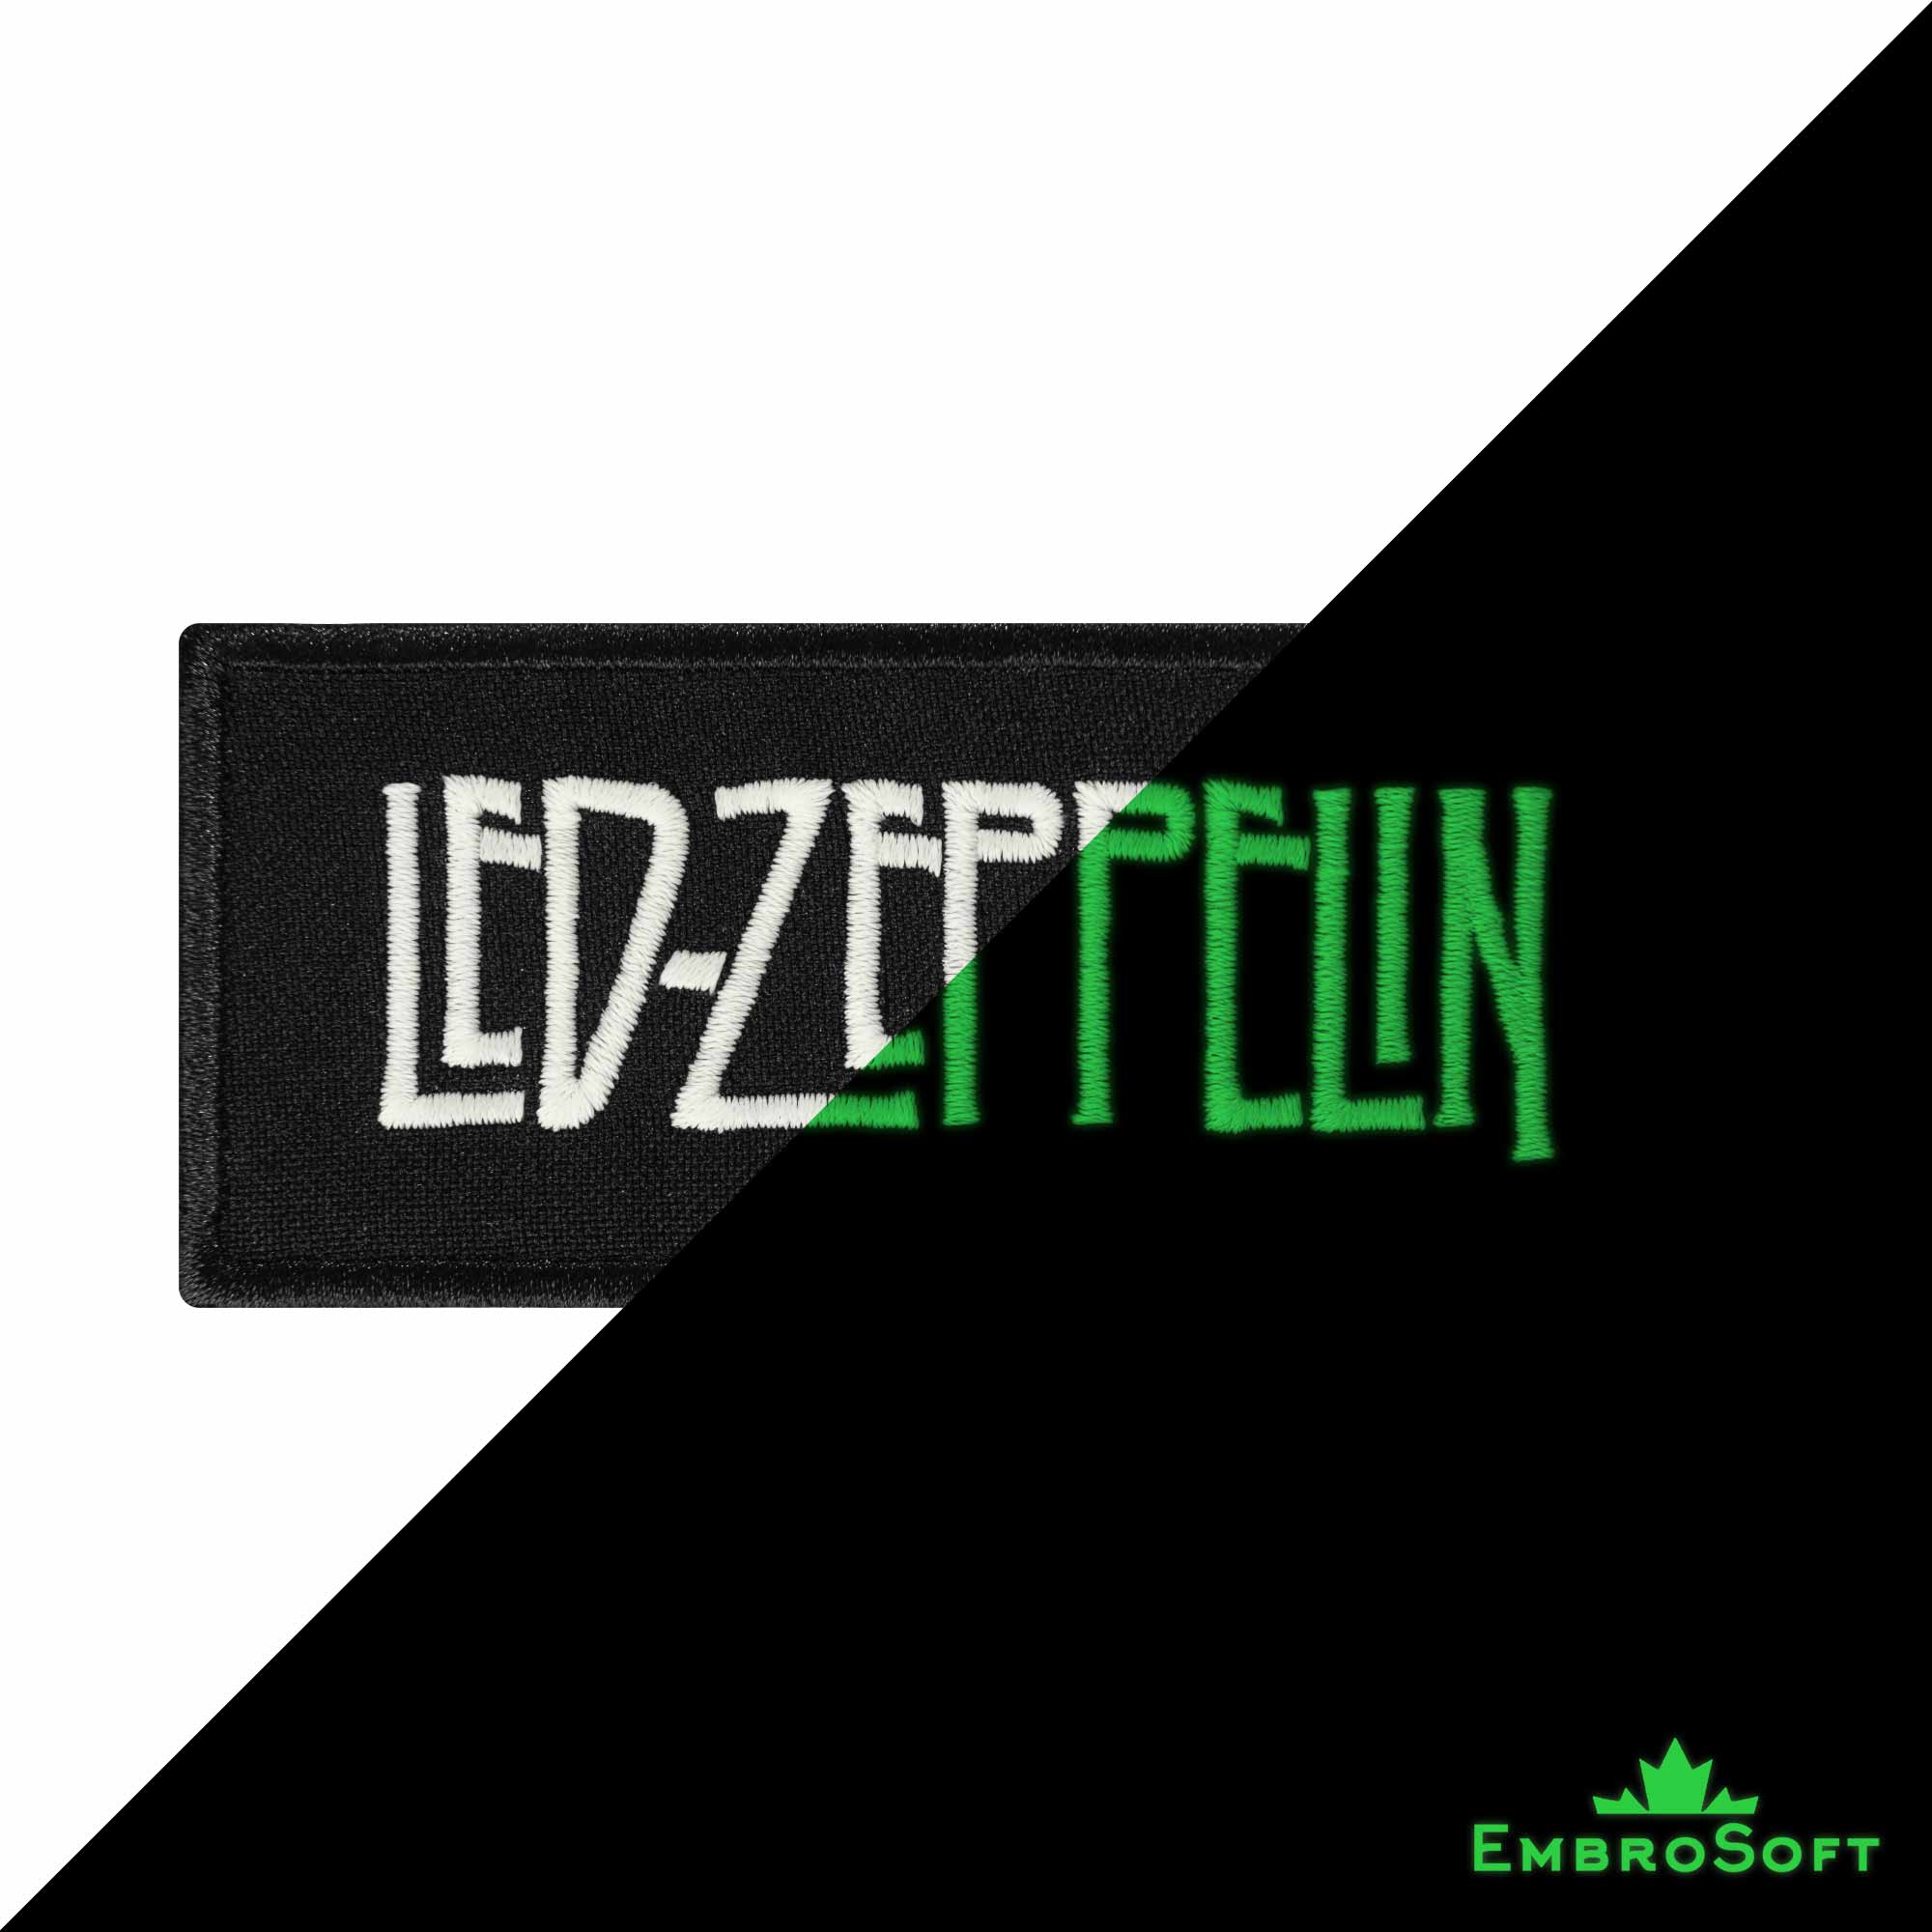 Zeppelin Logo - Led Zeppelin Logo Embroidered Glowing Patch (4.1